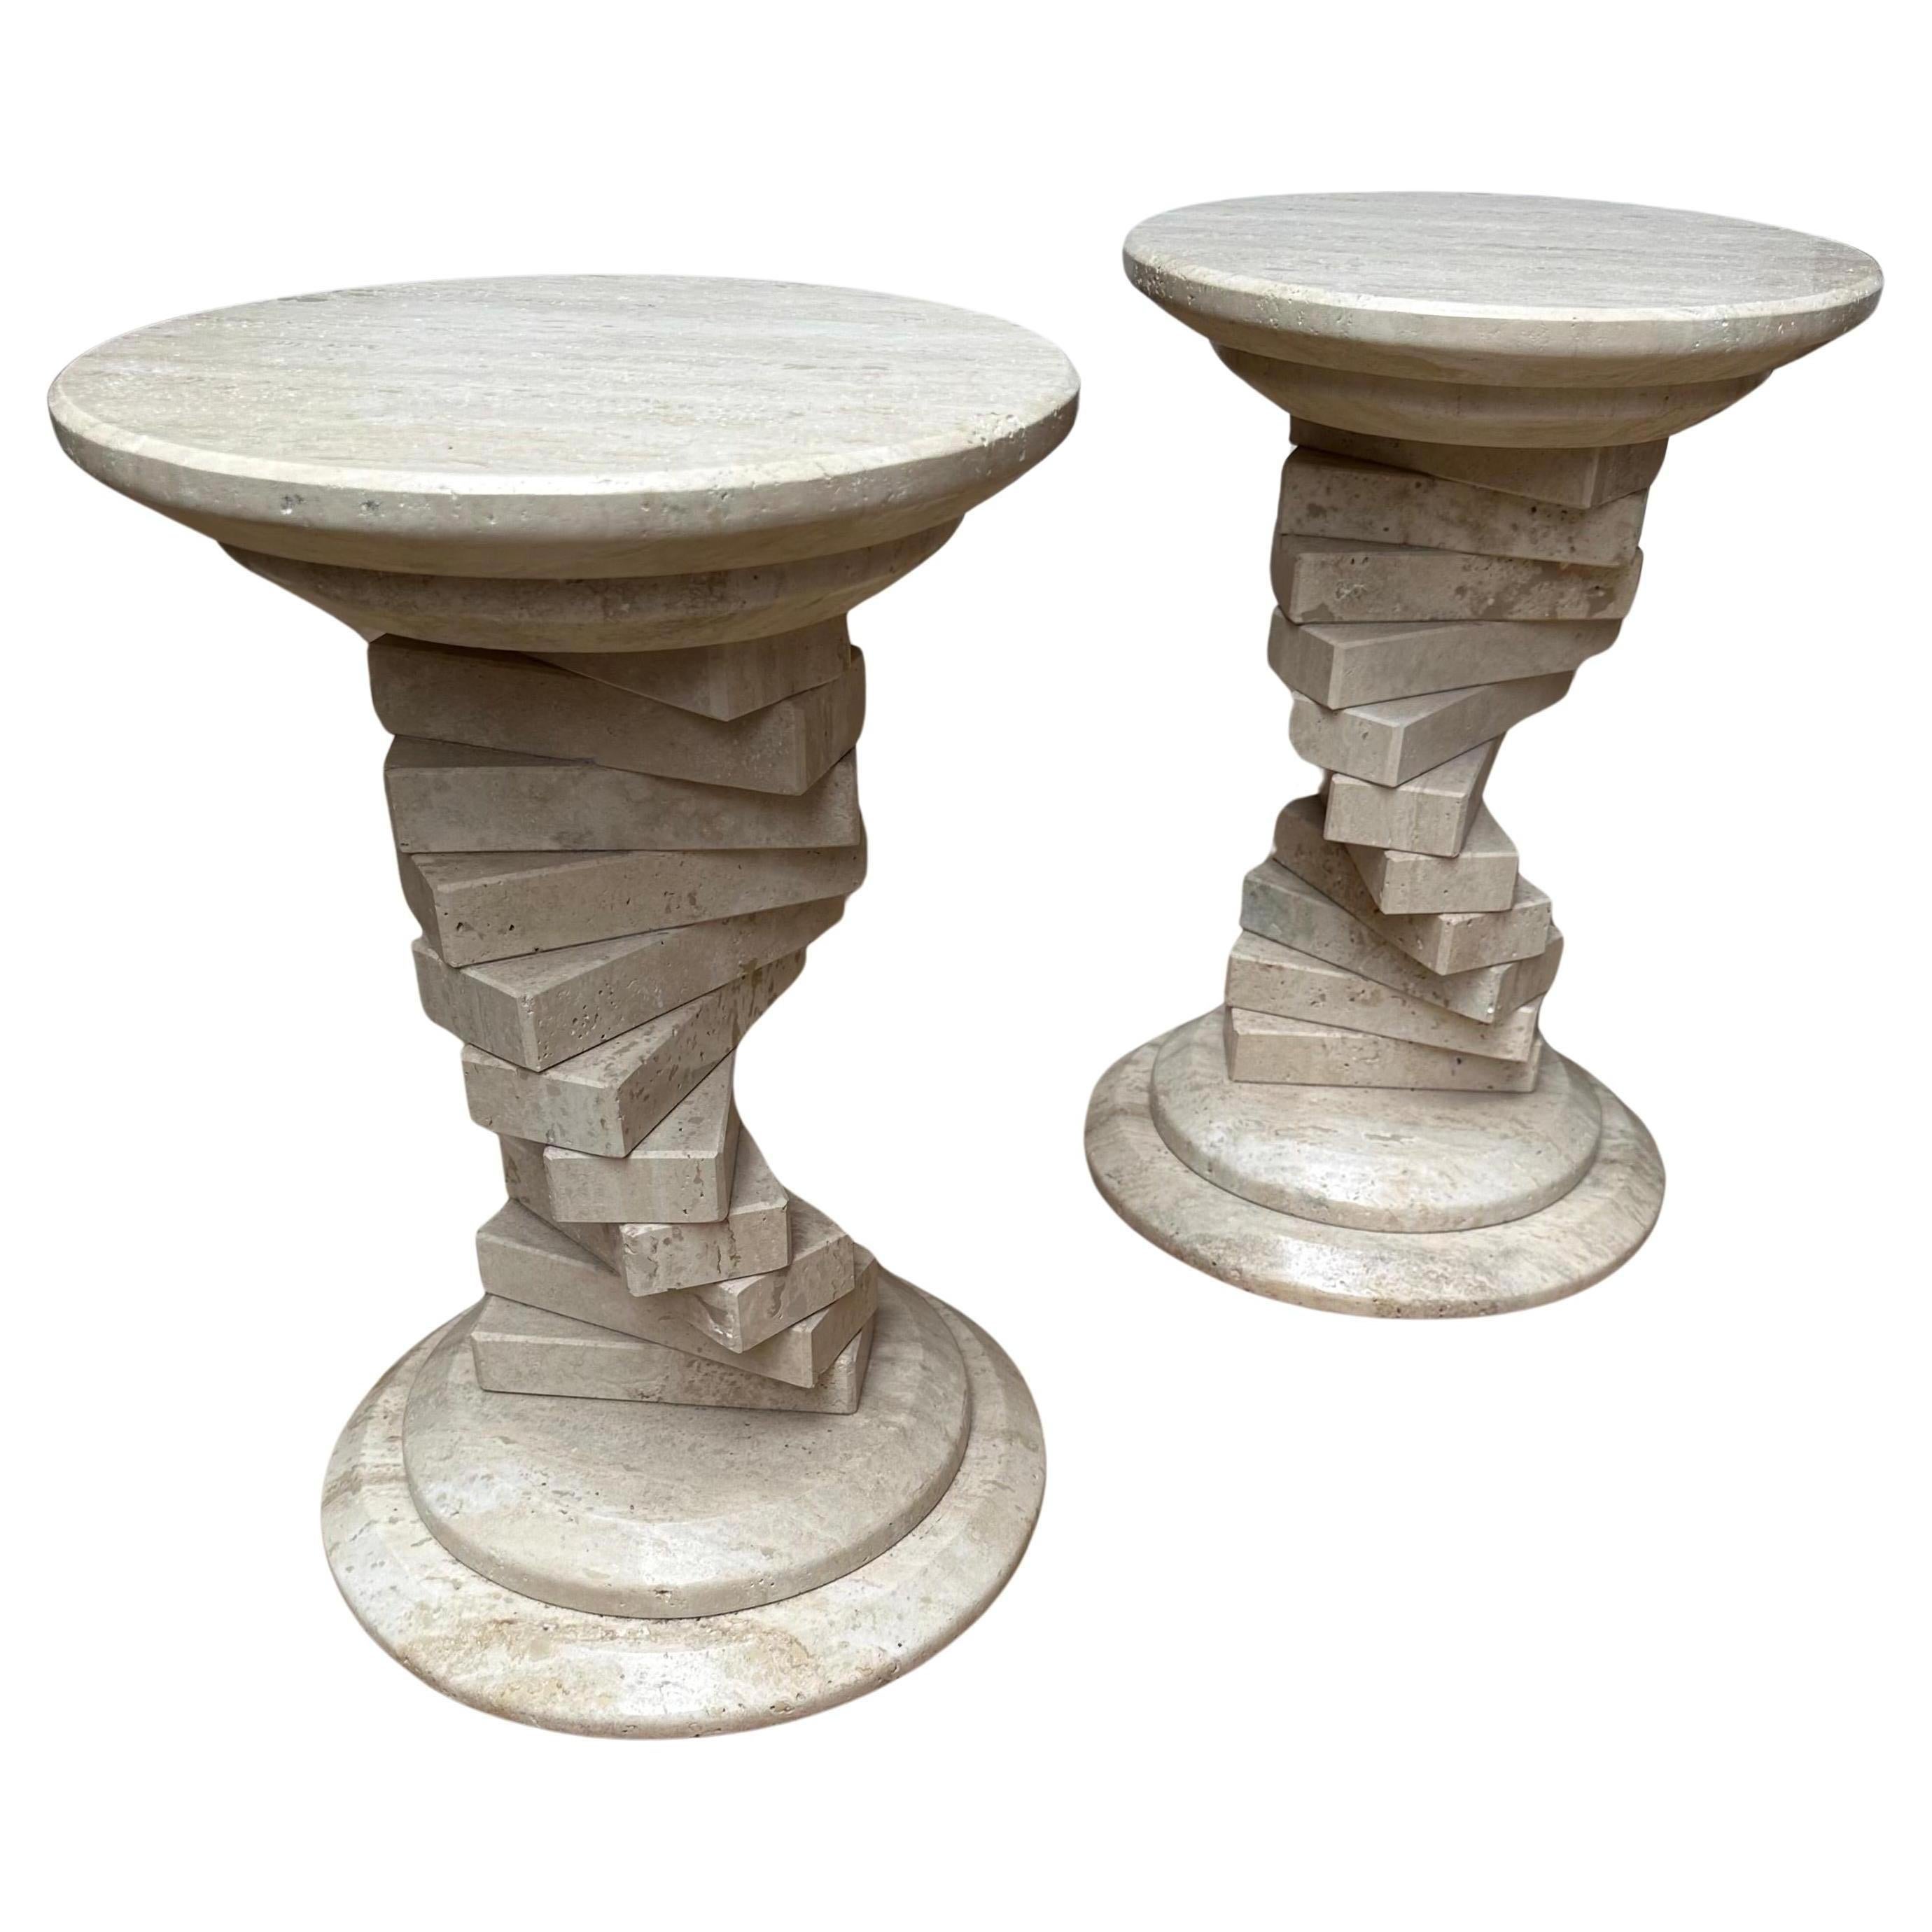 Pair of Italian Travertine Circular End Tables w. Stacked Blocks Design Stand